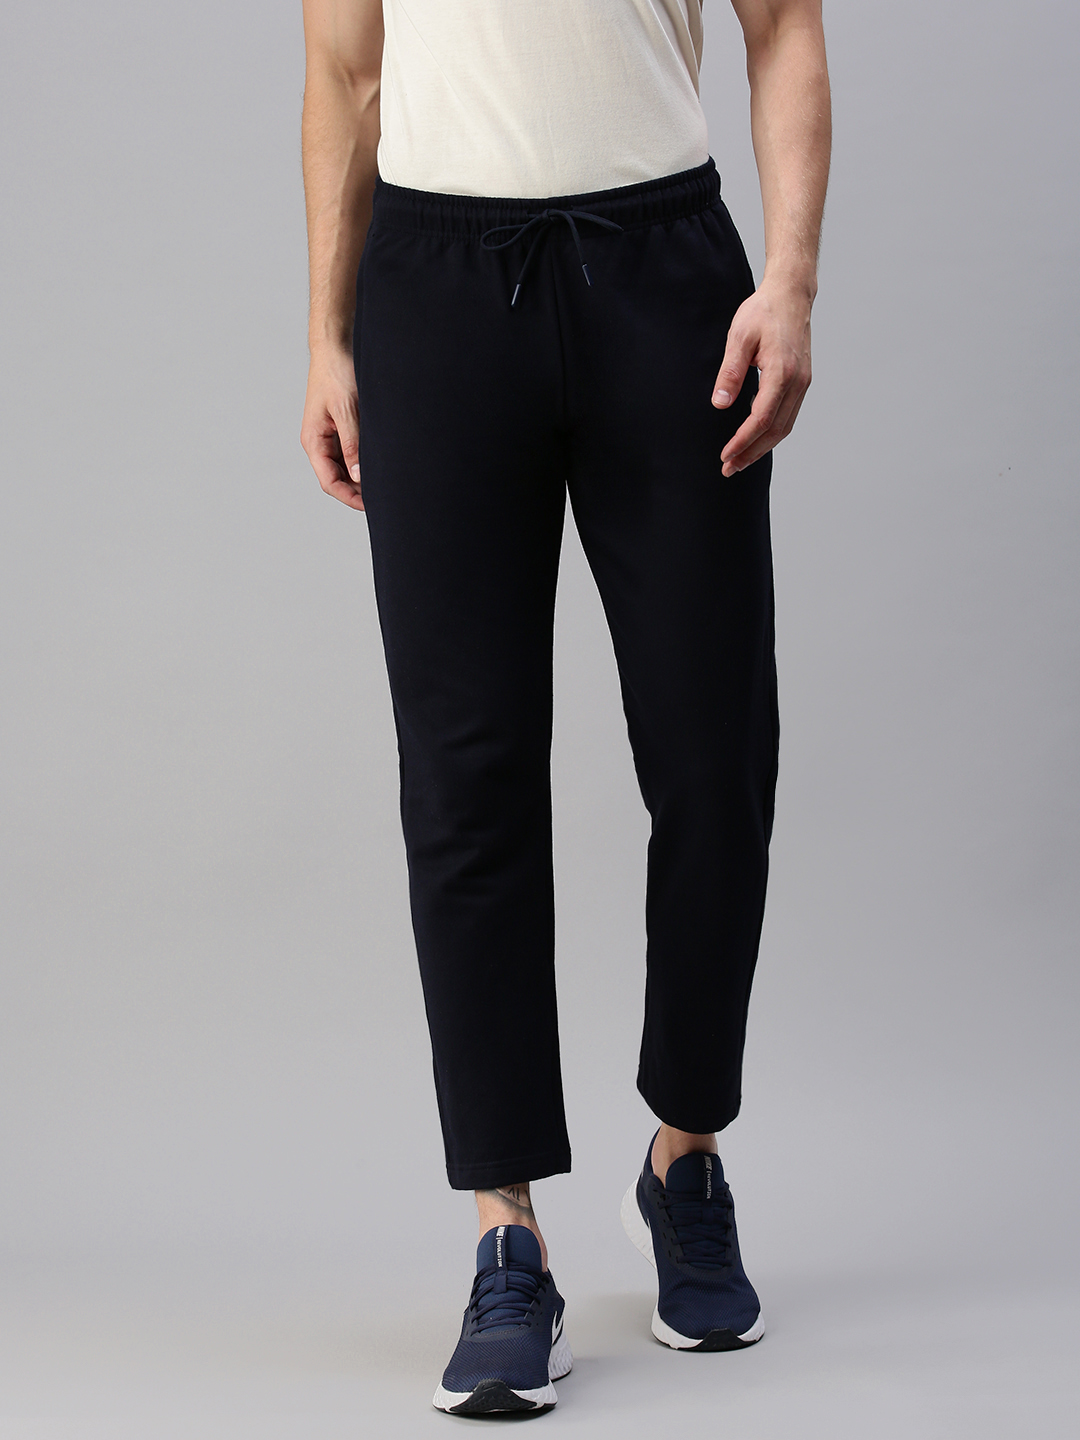 NS Cotton Regular Fit Mens Track Pant | Lower | Pajama with Side Pockets  for Casual | - Black (M) : Amazon.in: Clothing & Accessories